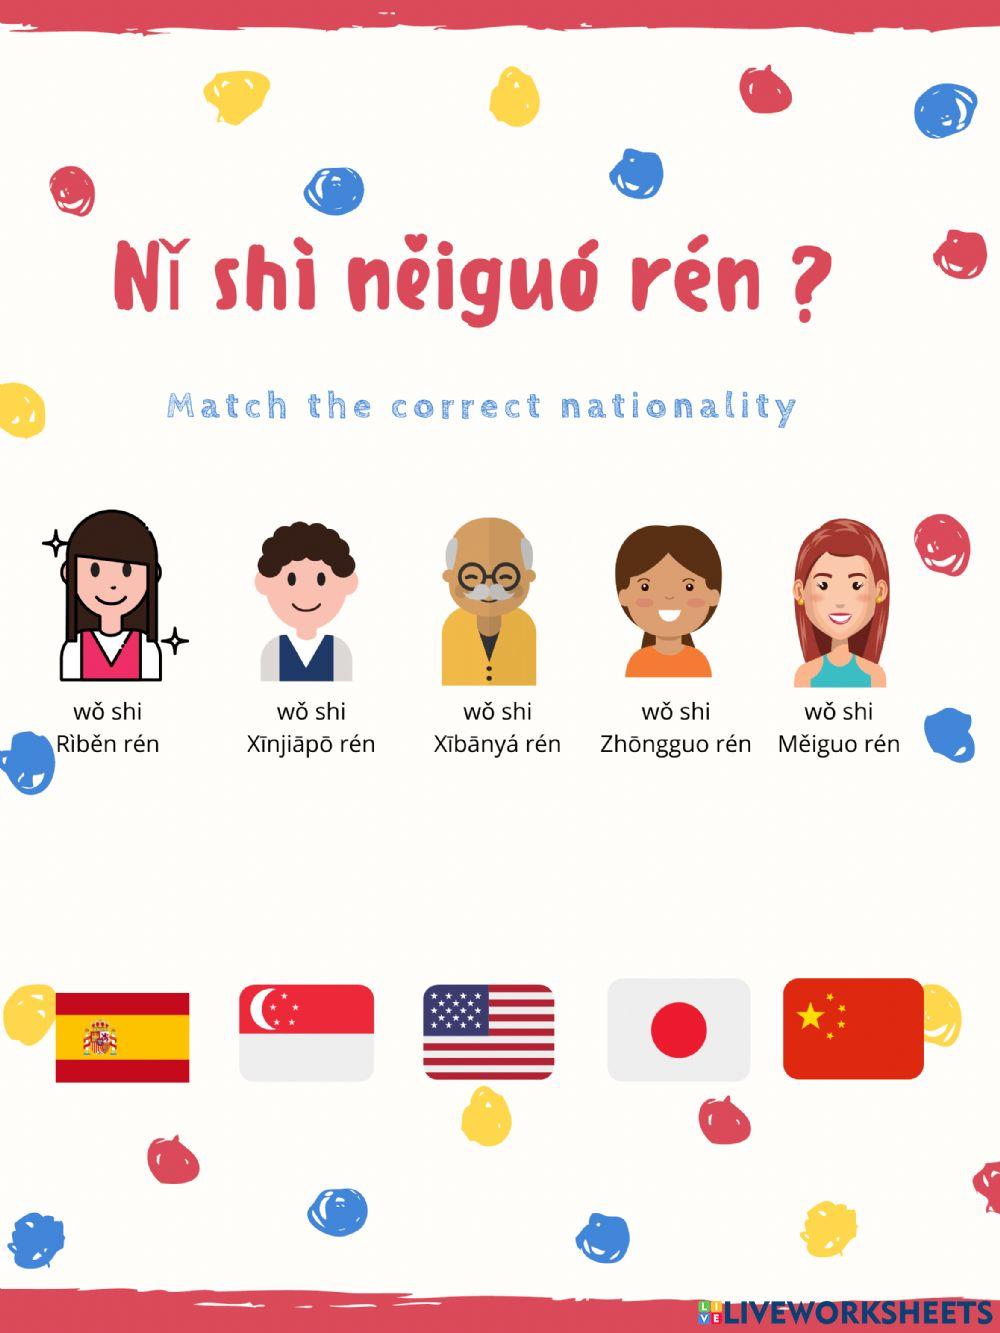 Nationality in Chinese